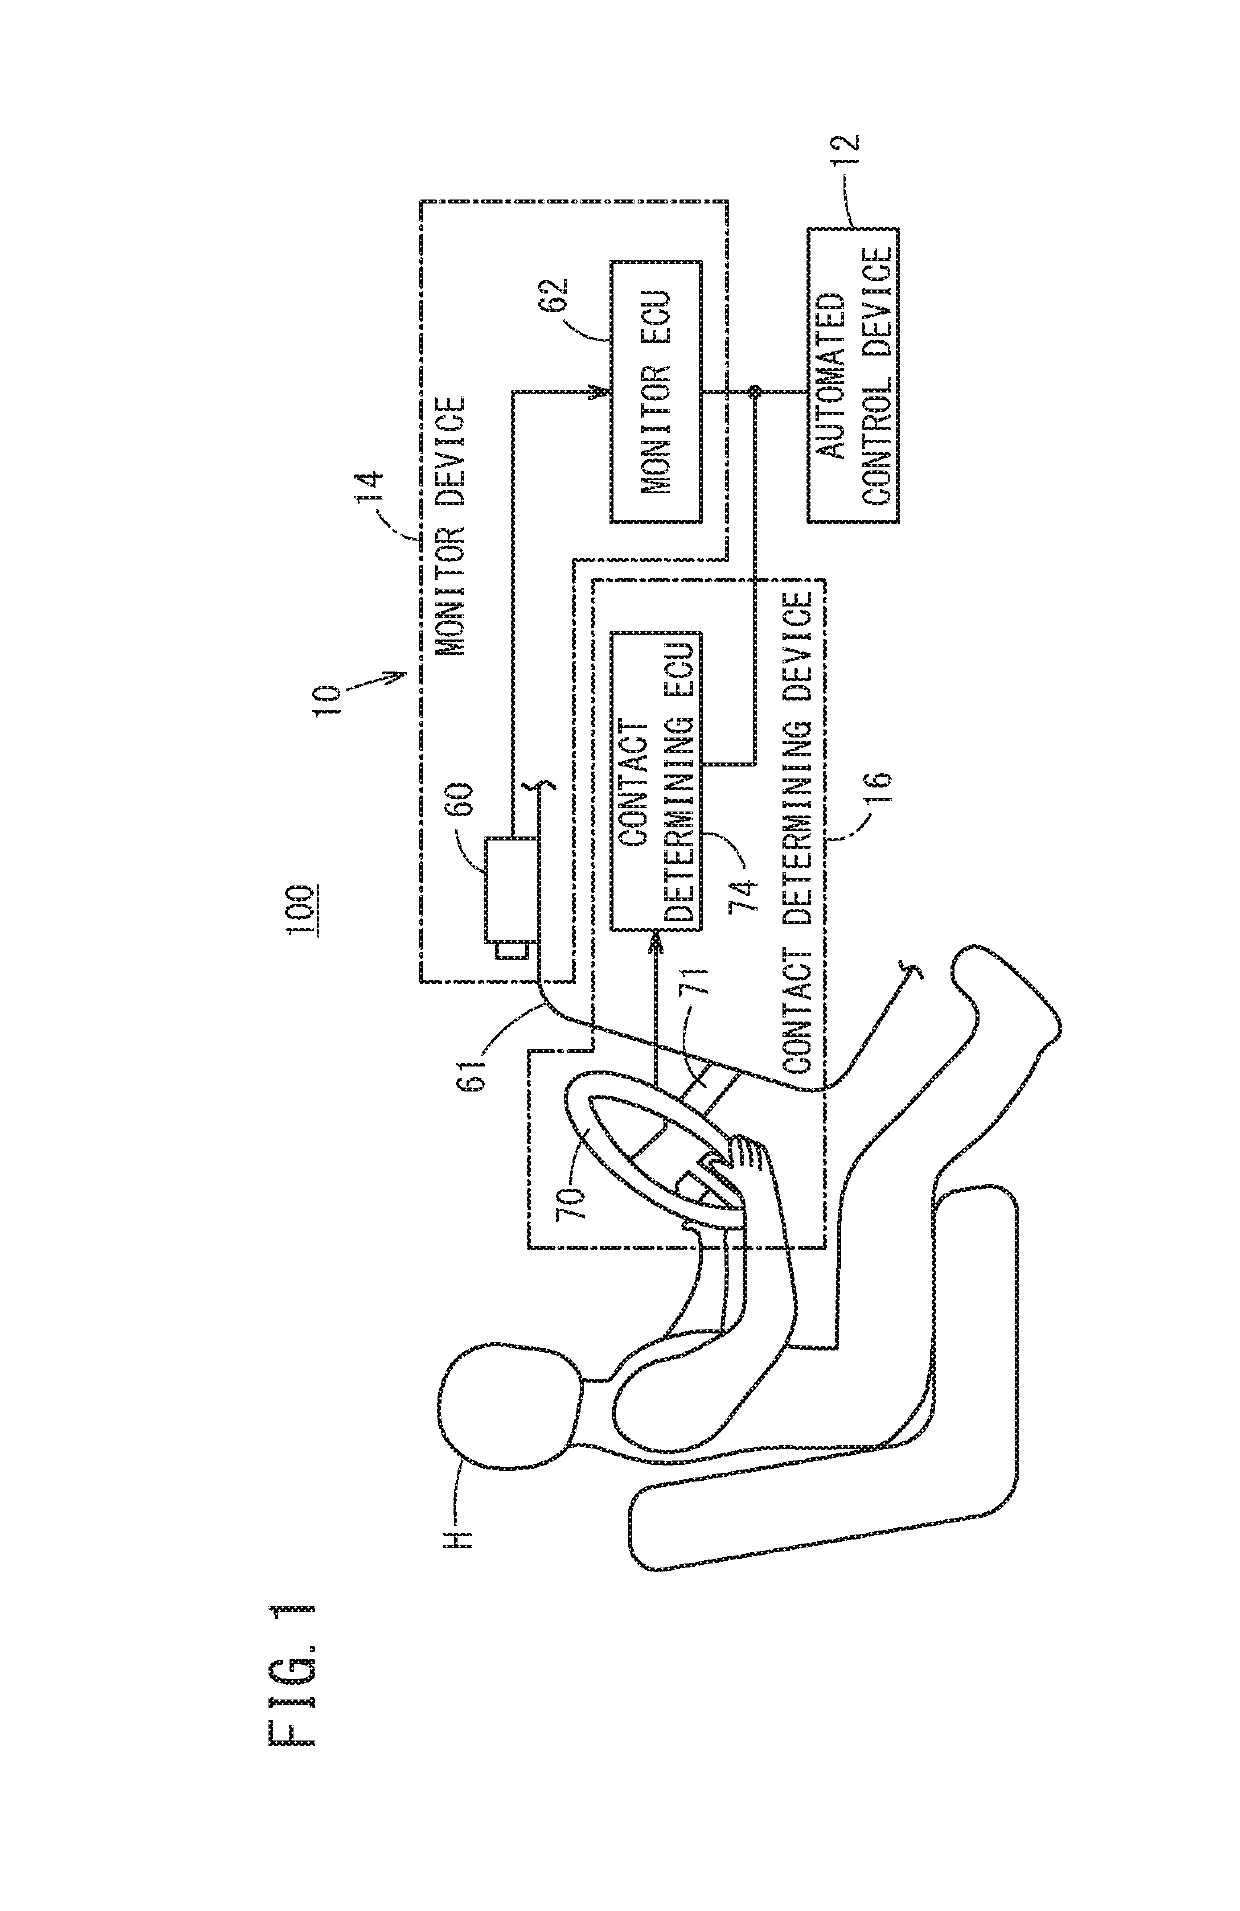 Automatic driving control device